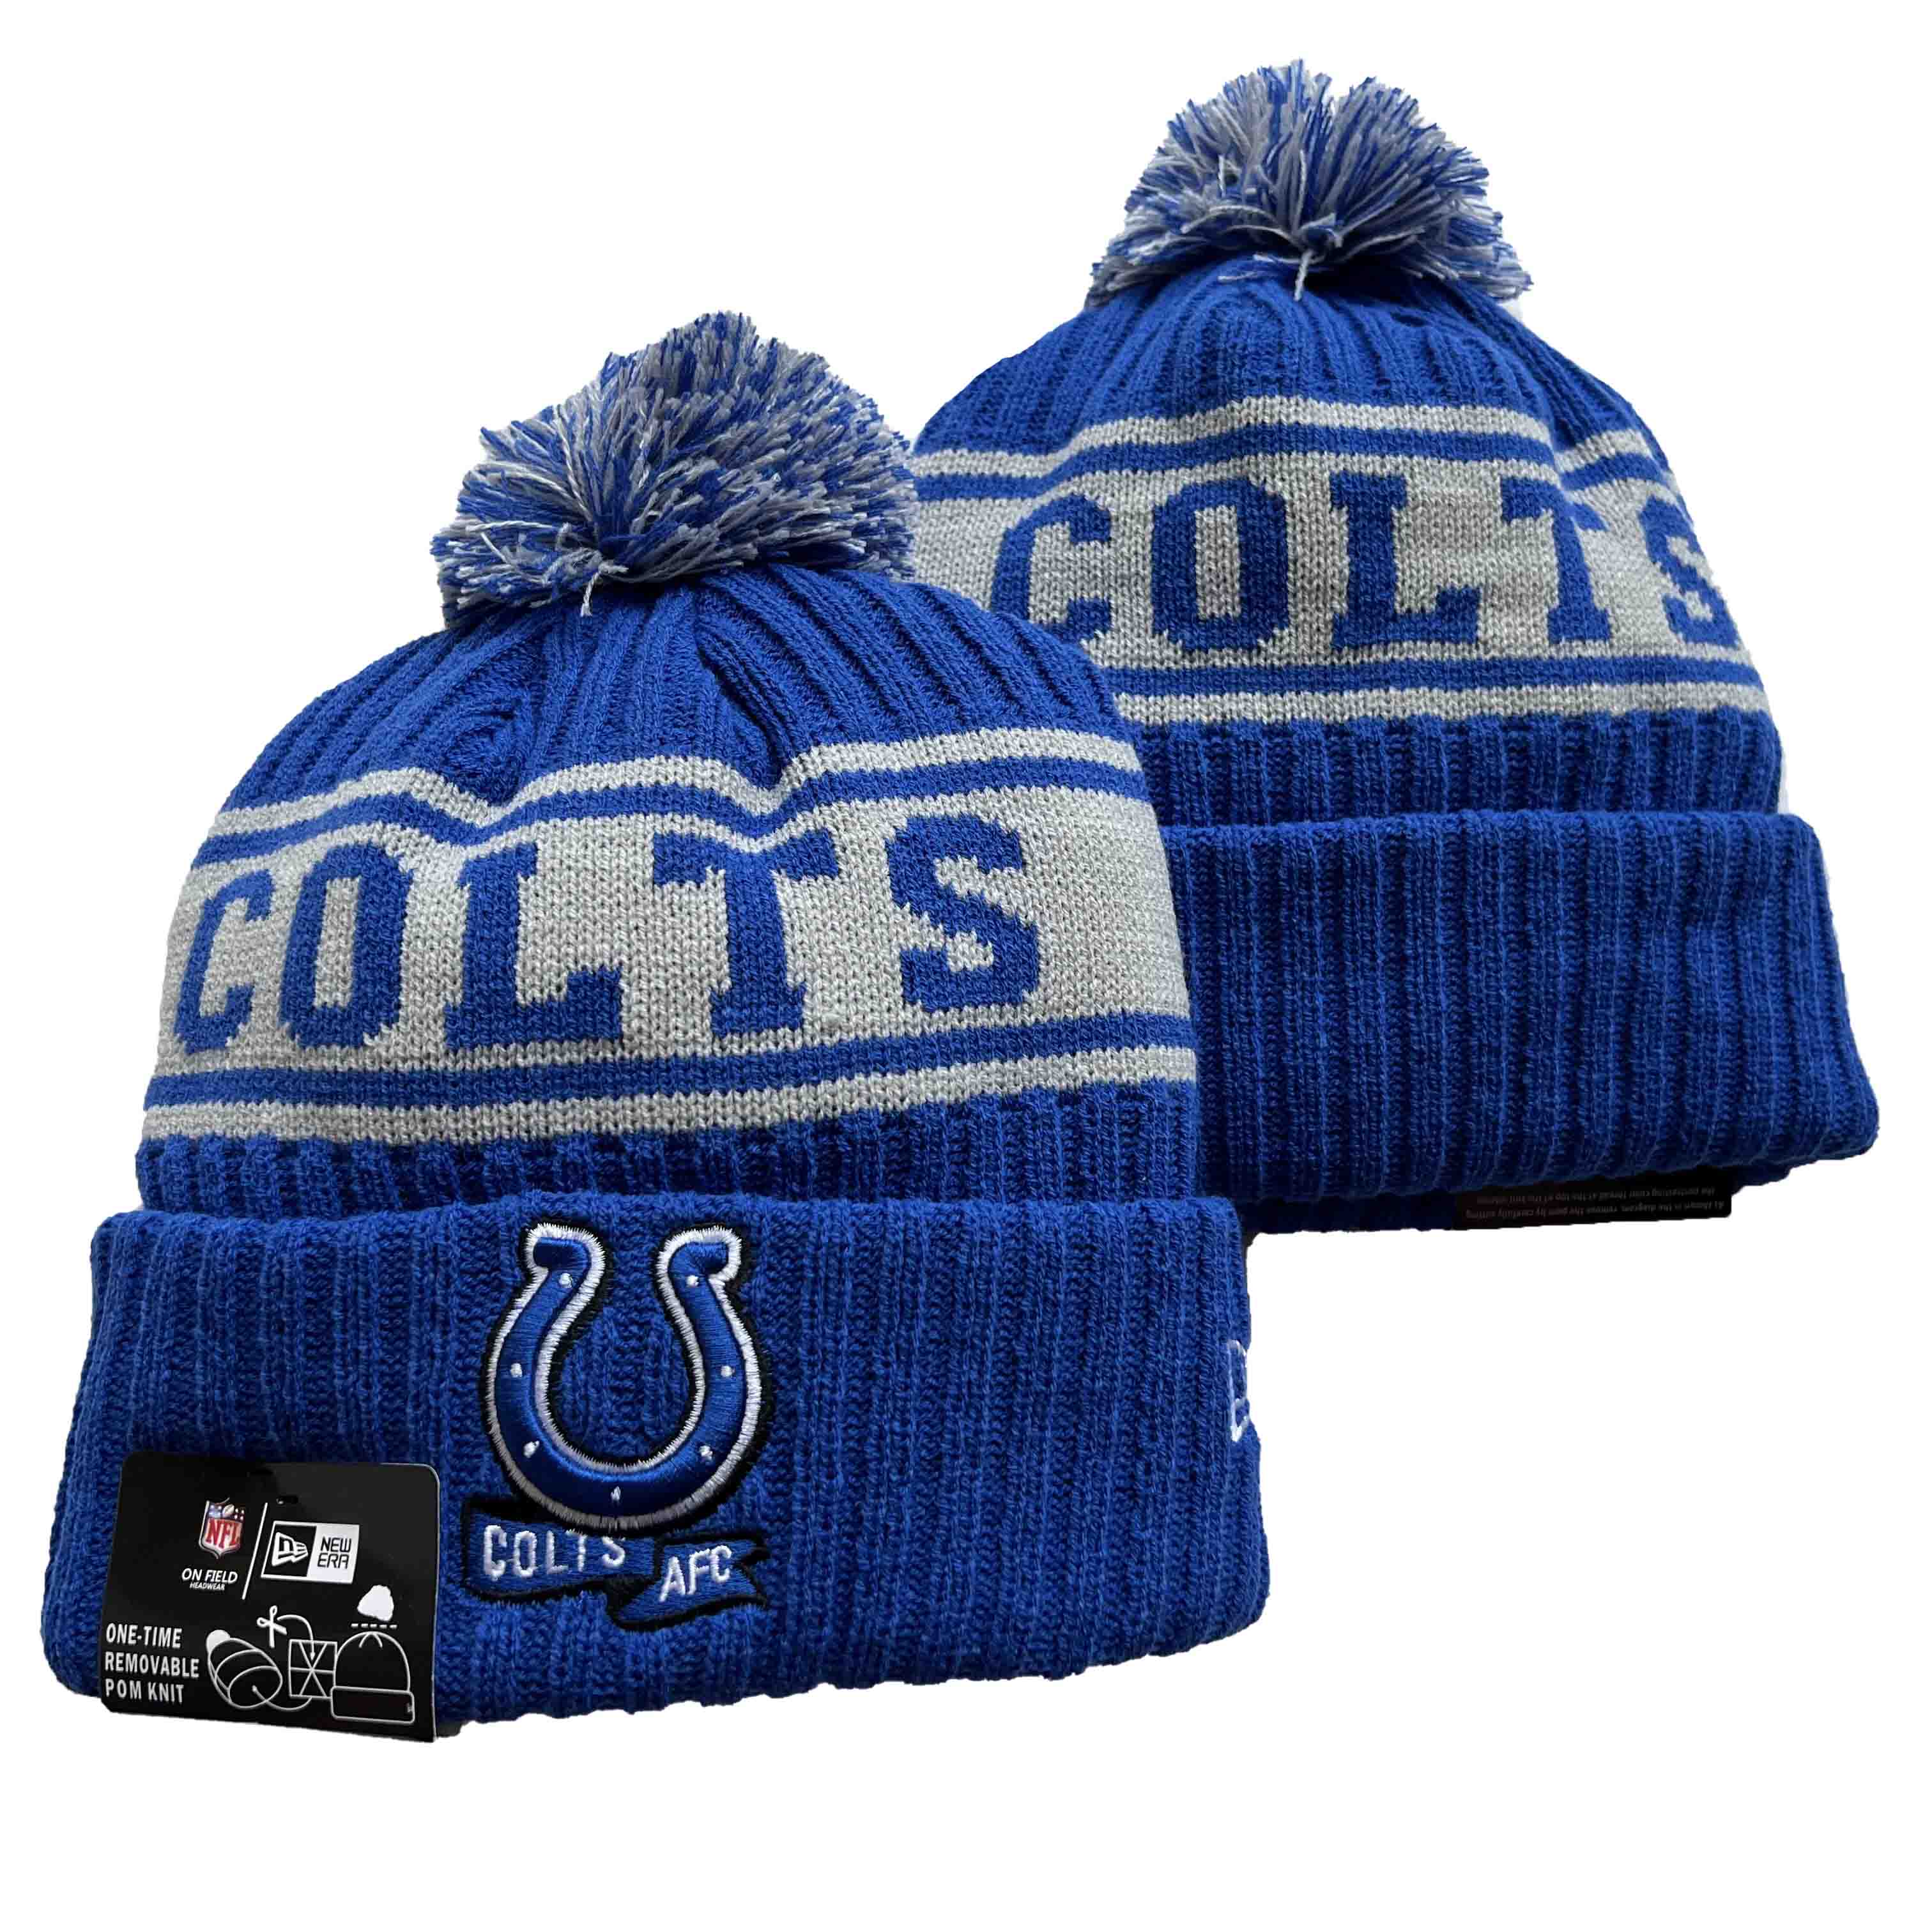 NFL Indianapolis Colts Beanies Knit Hats-YD1001